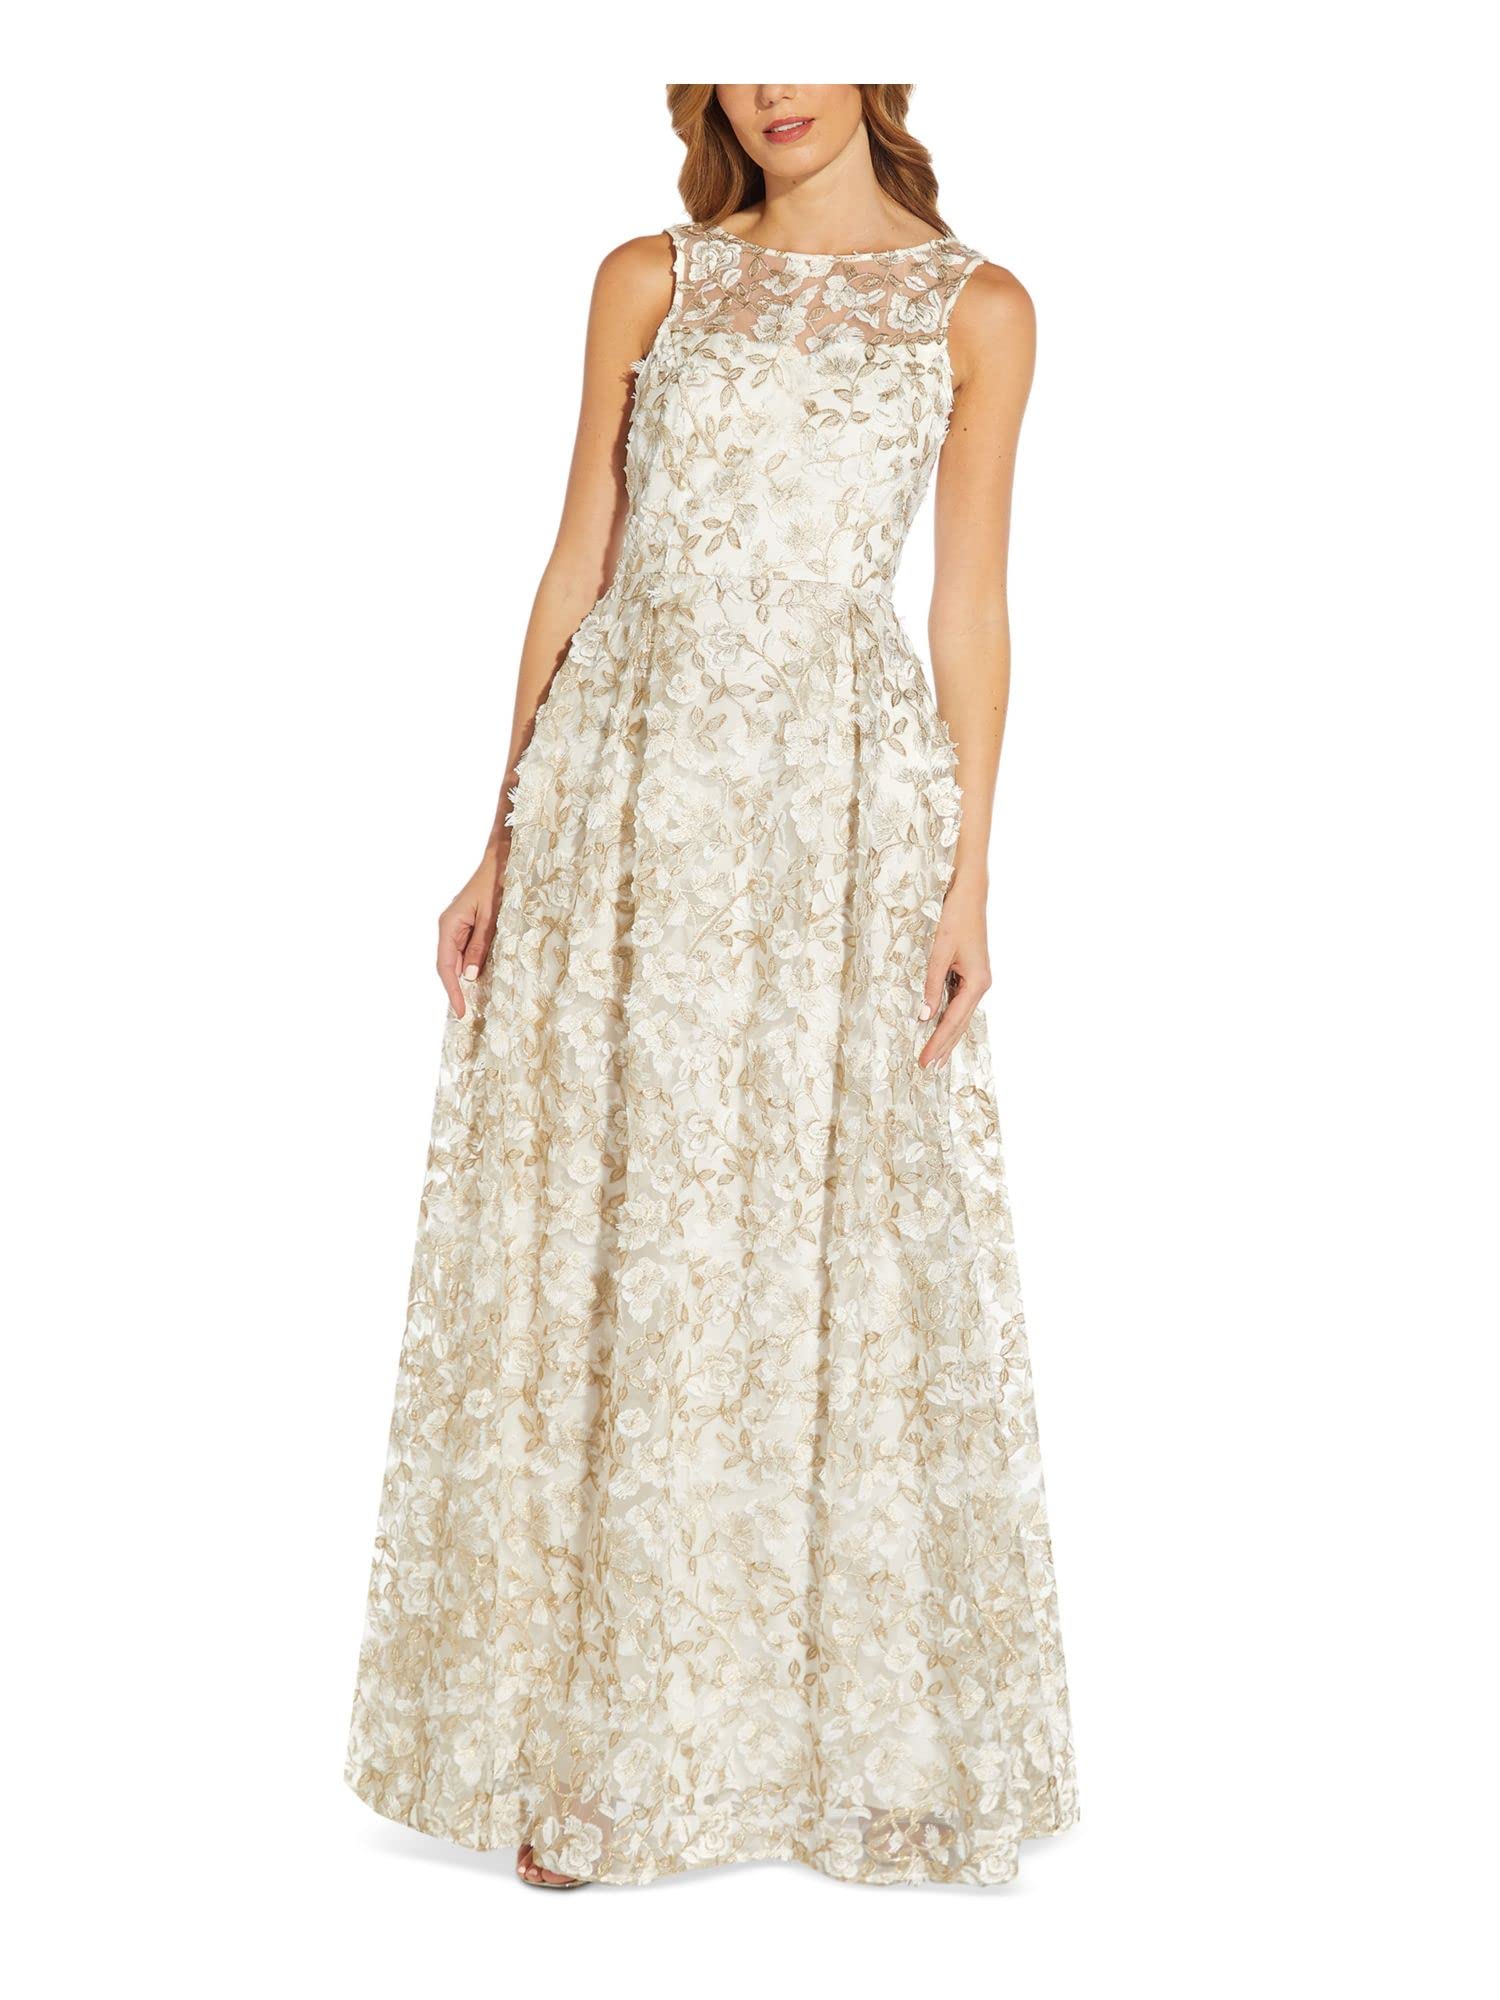 Adrianna Papell Women's Metallic Floral Gown